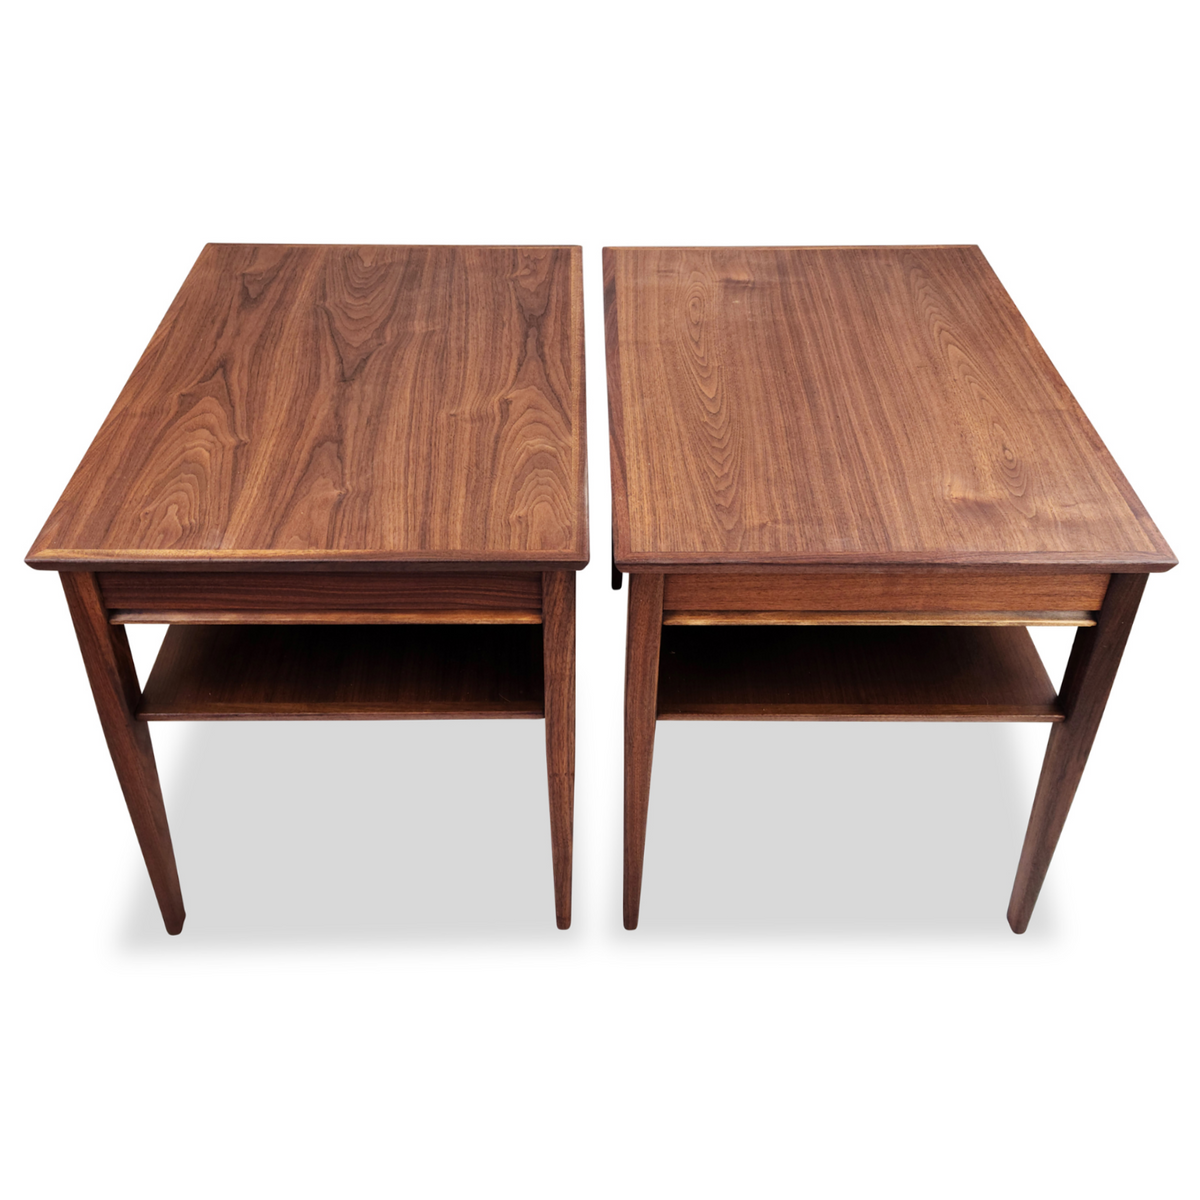 Pair of Walnut End Tables by Honderich